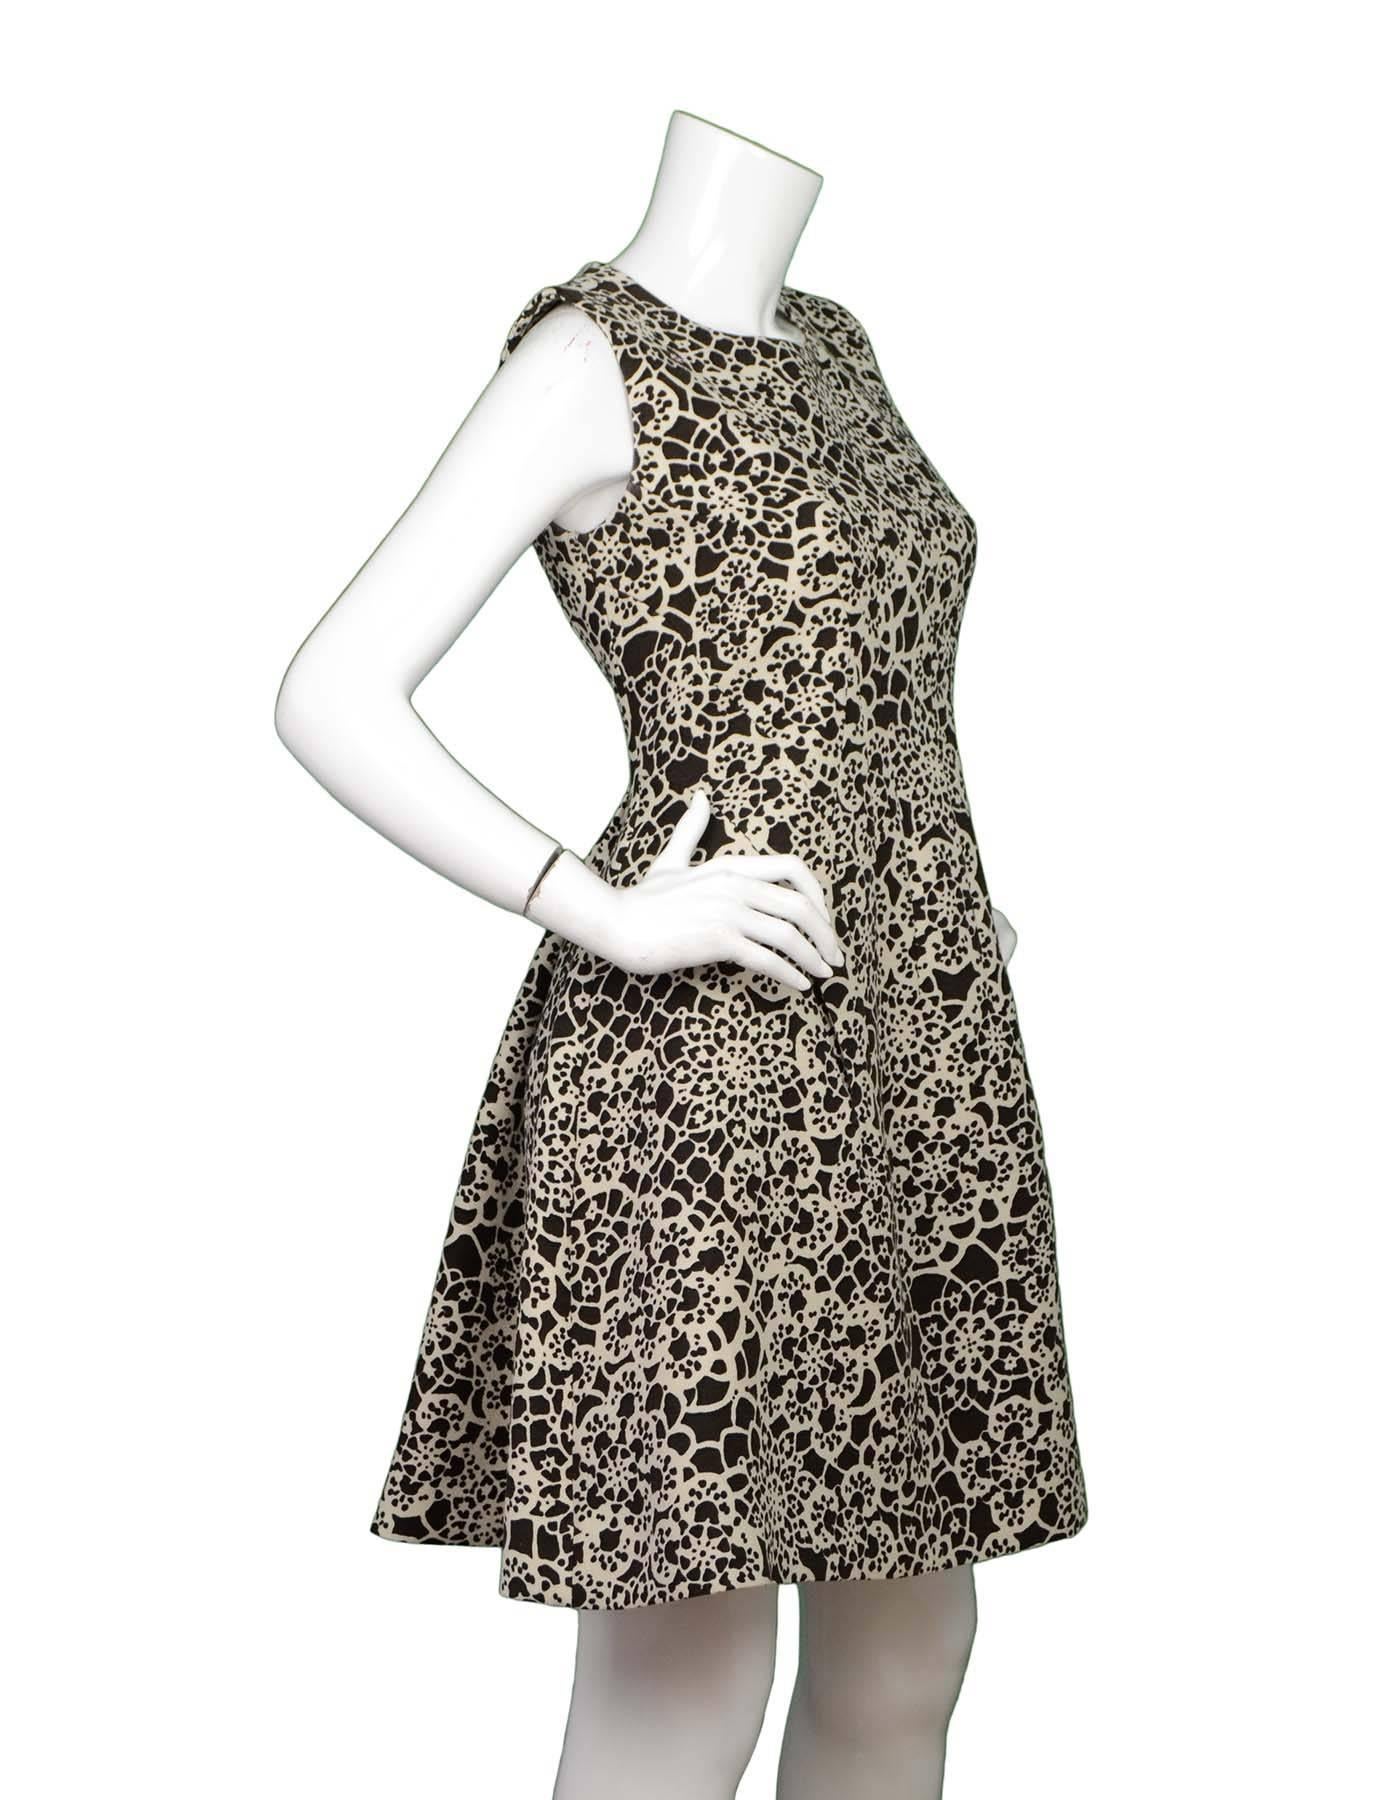 Thakoon Brown and Ivory Dress Sz 6

Features floral print and metallic shimmer throughout

Made In: Italy
Color: Brown and ivory
Composition: 62% Wool, 20% Viscose, 18% Nylon
Lining: Black 100% Cupro
Exterior Pockets: Front slit